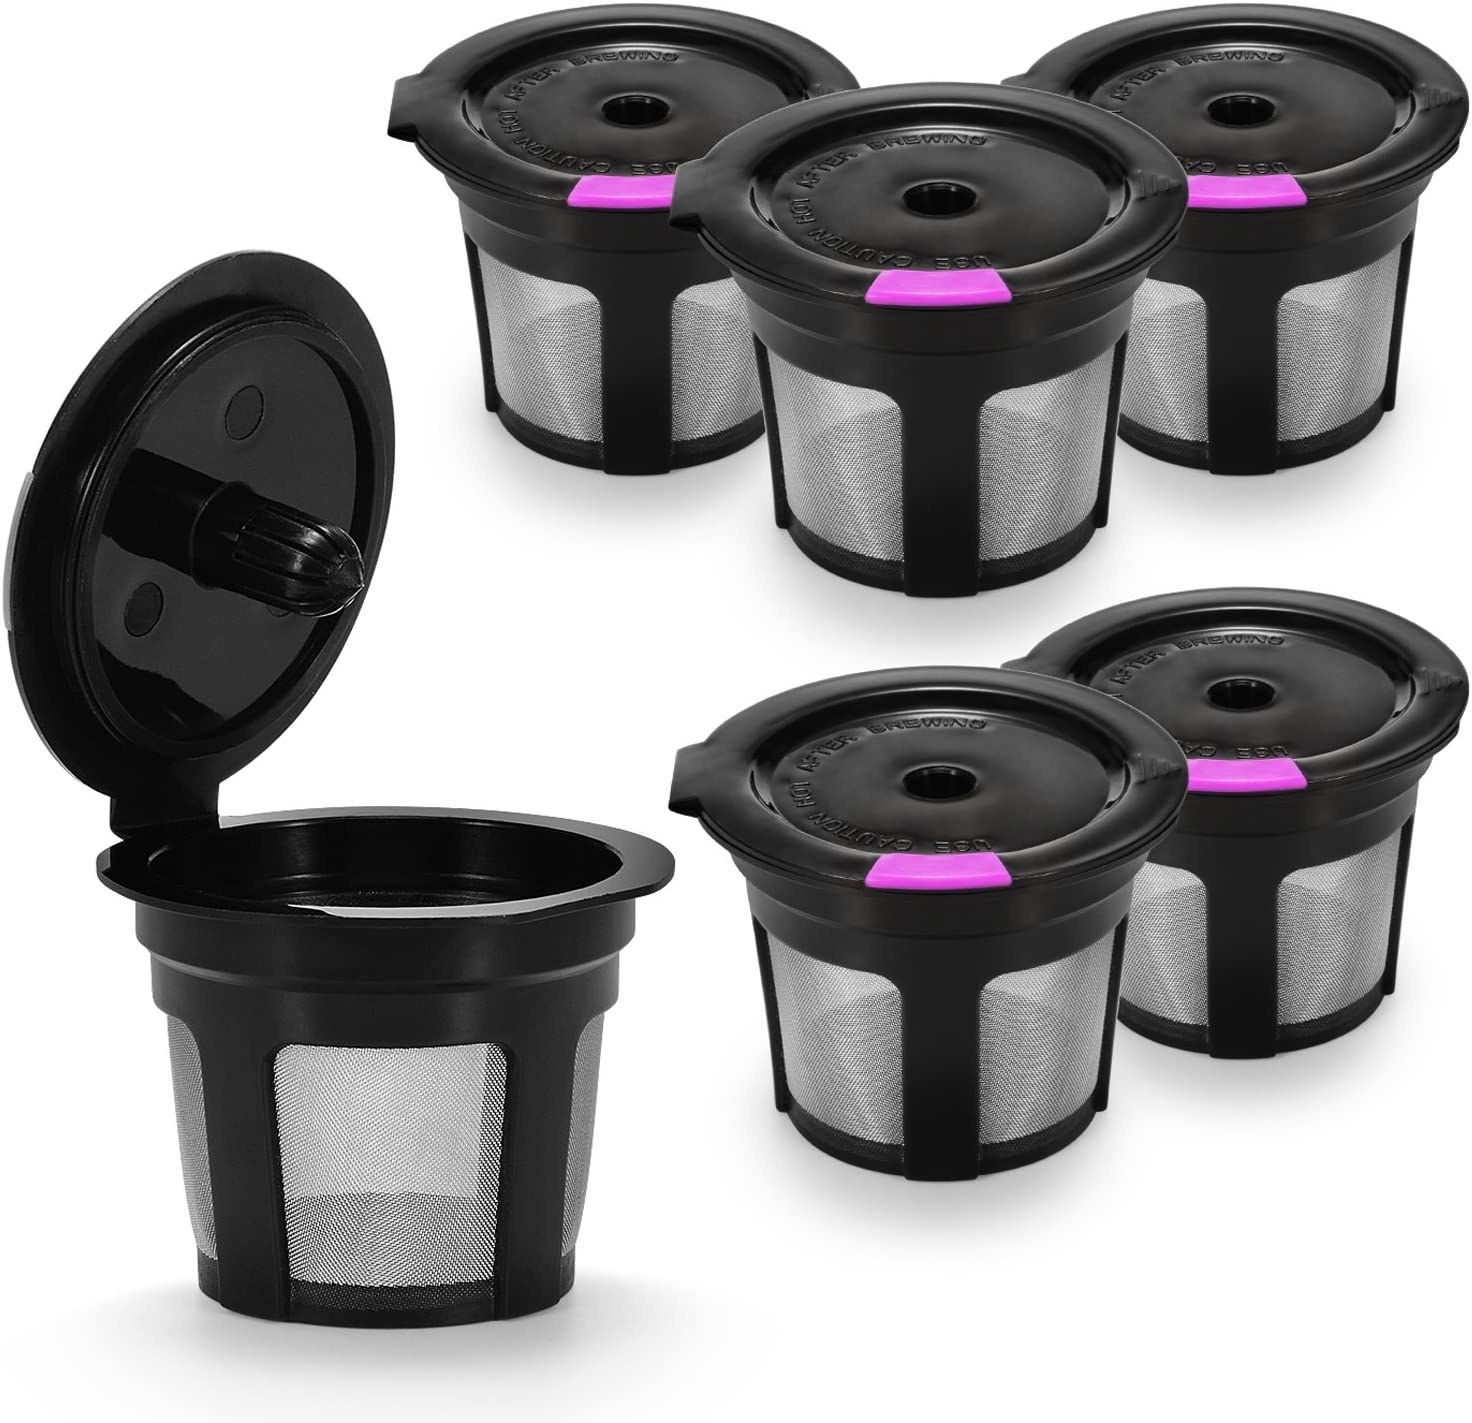 The set of reusable K-cup pods